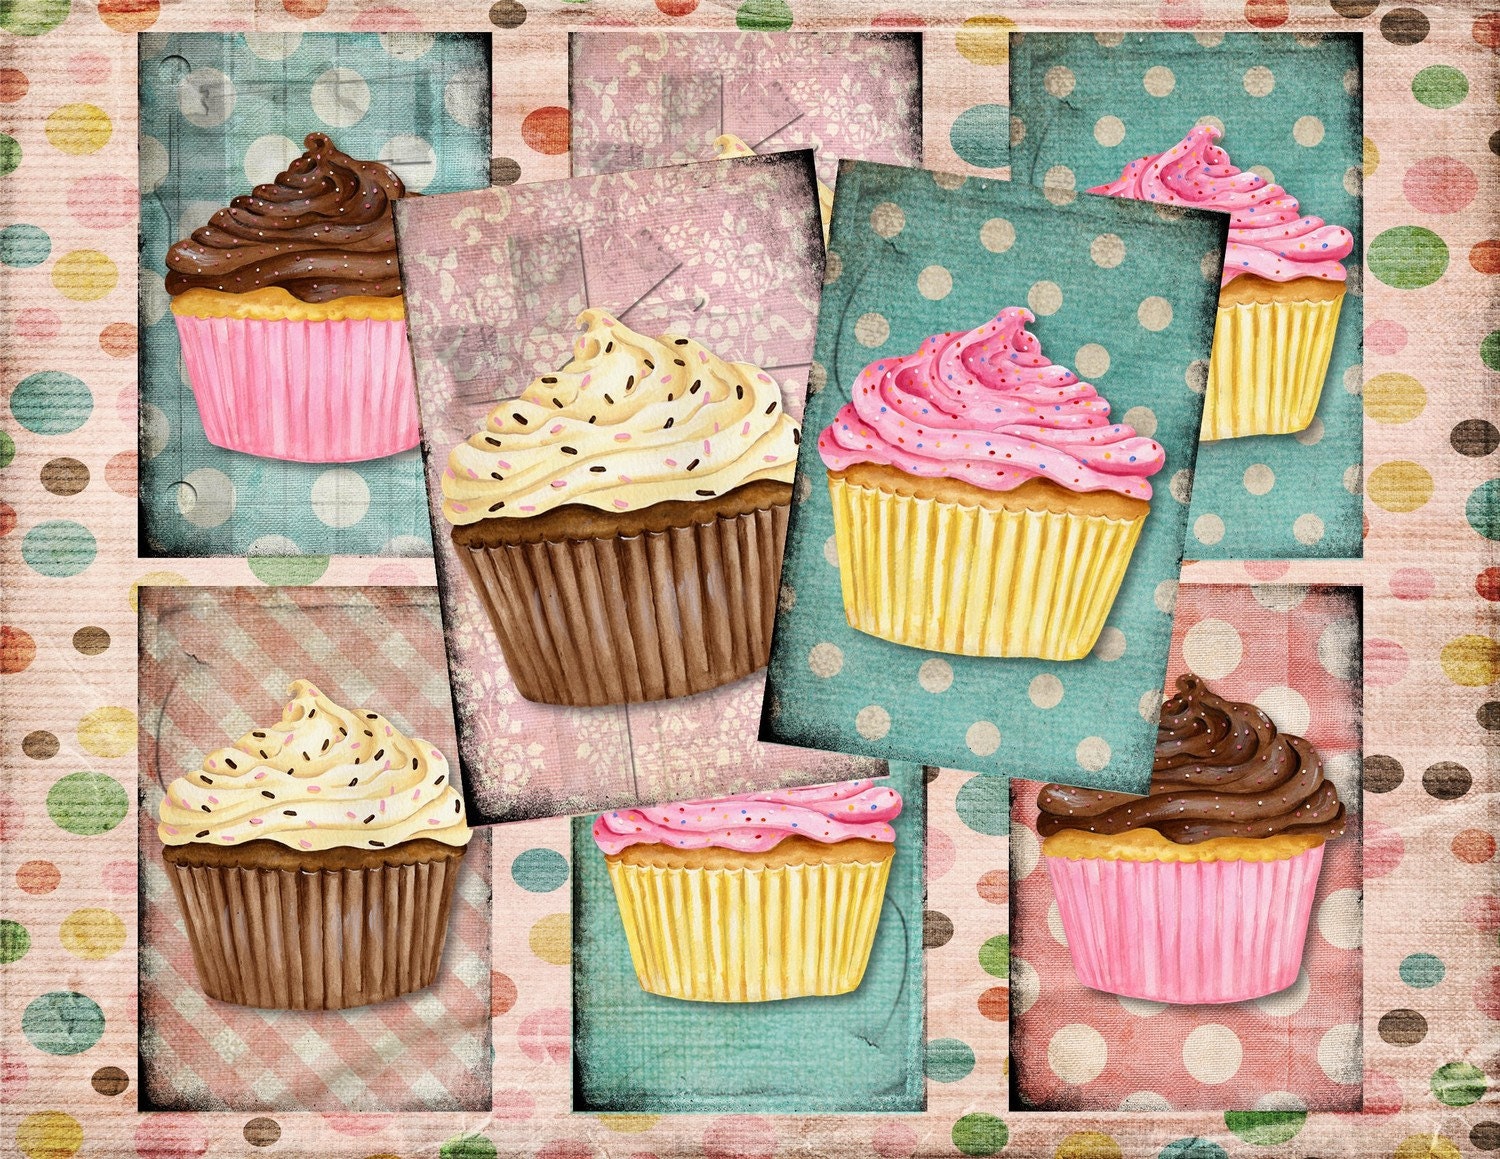 Set of 6 AGeD GRuNGe sHaBBY CupCAKe baKEry BaCKGRouND PaPeRs ViNTaGe aNTiQUe DiGiTaL CoLLaGe sHeeT aLTeReD HaNG TaGs BooK JouRNaL SCRaPBooKiNG SuPPLieS No. 103